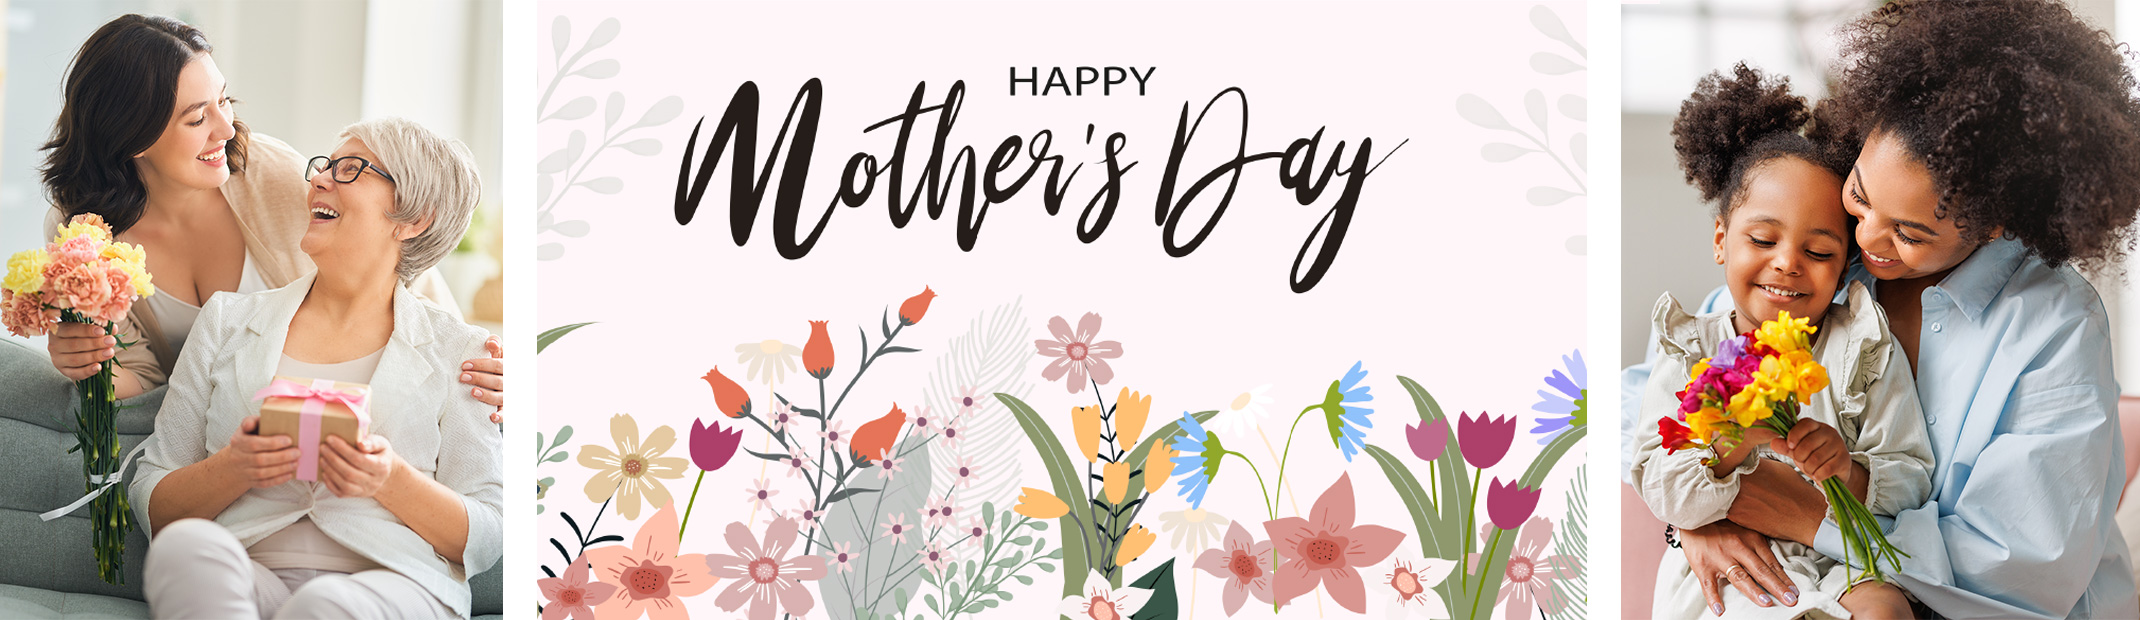 A Happy Mother's Day graphic with flowers sandwiched between two images of daugthers with their moms.